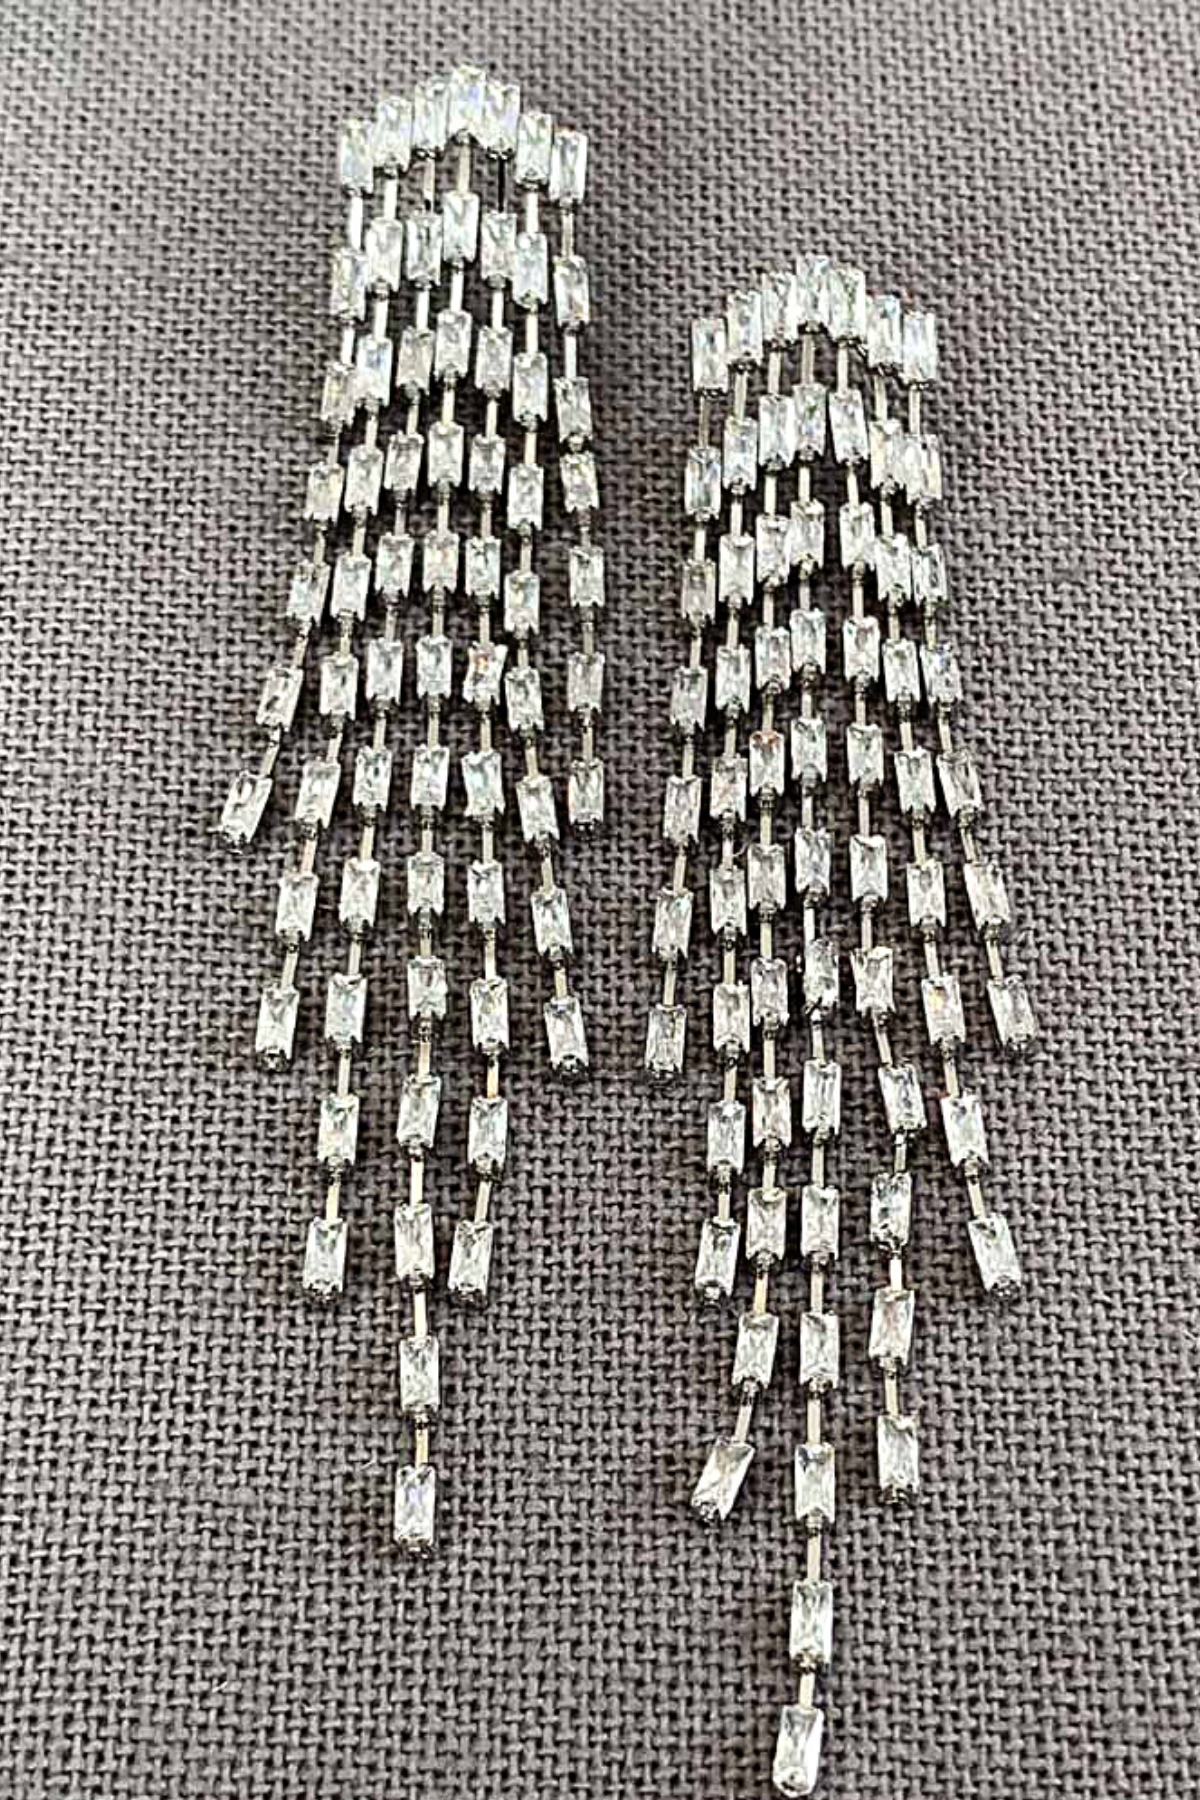 Penelope spectacular waterfall earrings - Park Lane Styling & Consulting